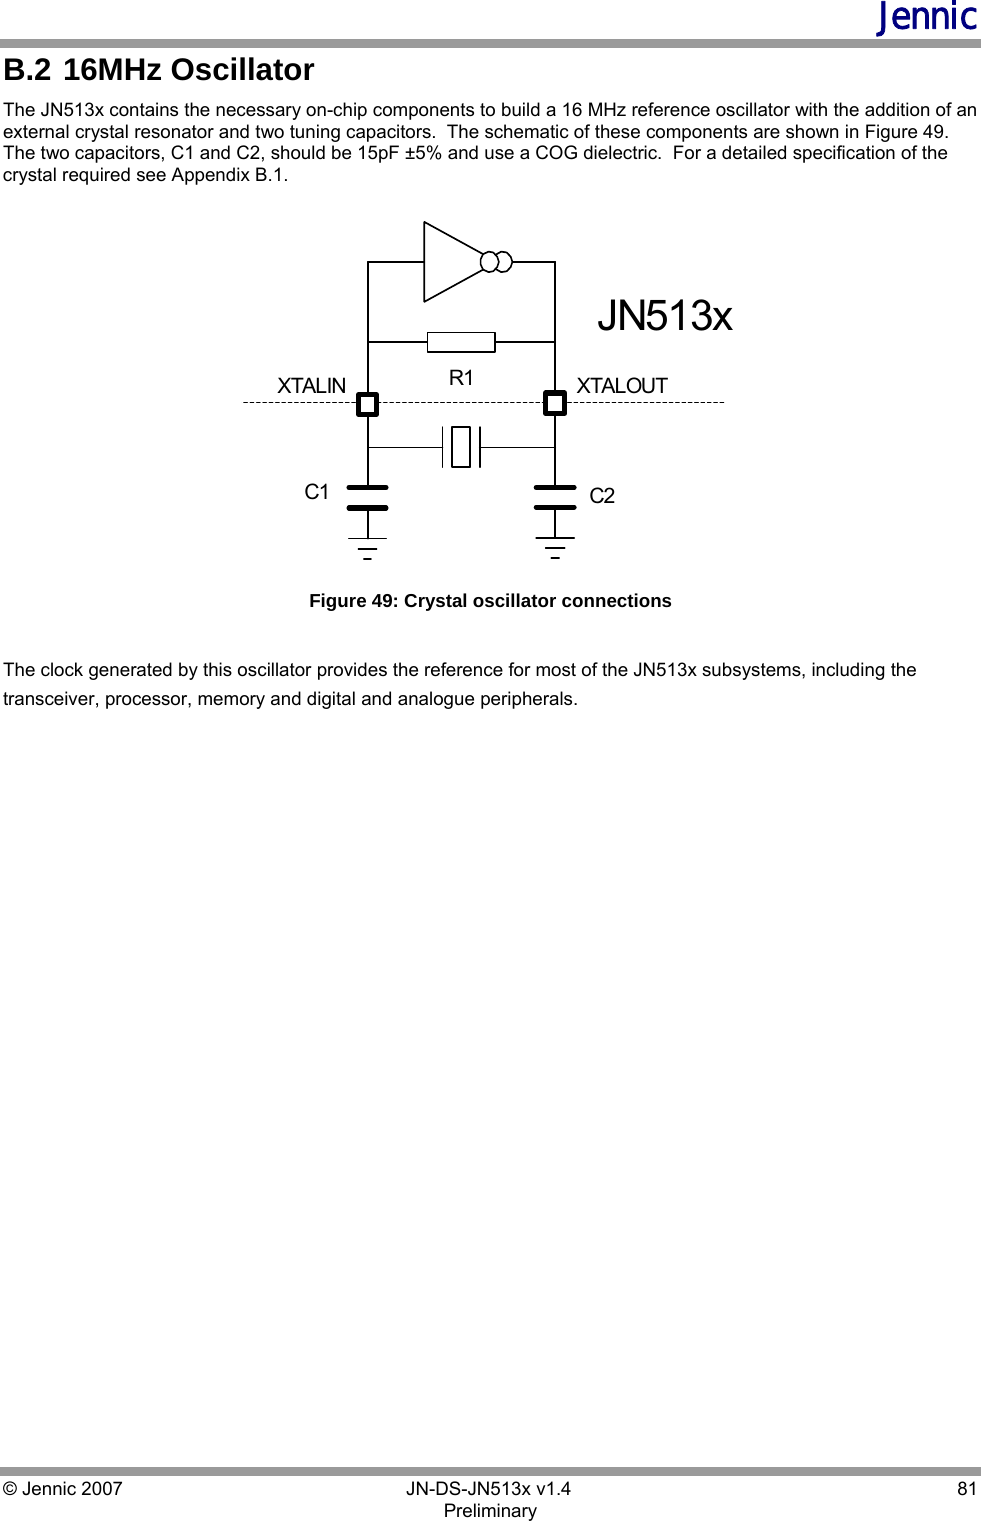 Jennic © Jennic 2007        JN-DS-JN513x v1.4  81 Preliminary B.2  16MHz Oscillator The JN513x contains the necessary on-chip components to build a 16 MHz reference oscillator with the addition of an external crystal resonator and two tuning capacitors.  The schematic of these components are shown in Figure 49.  The two capacitors, C1 and C2, should be 15pF ±5% and use a COG dielectric.  For a detailed specification of the crystal required see Appendix B.1. XTALOUTC2C1R1XTALINJN513x Figure 49: Crystal oscillator connections  The clock generated by this oscillator provides the reference for most of the JN513x subsystems, including the transceiver, processor, memory and digital and analogue peripherals.   